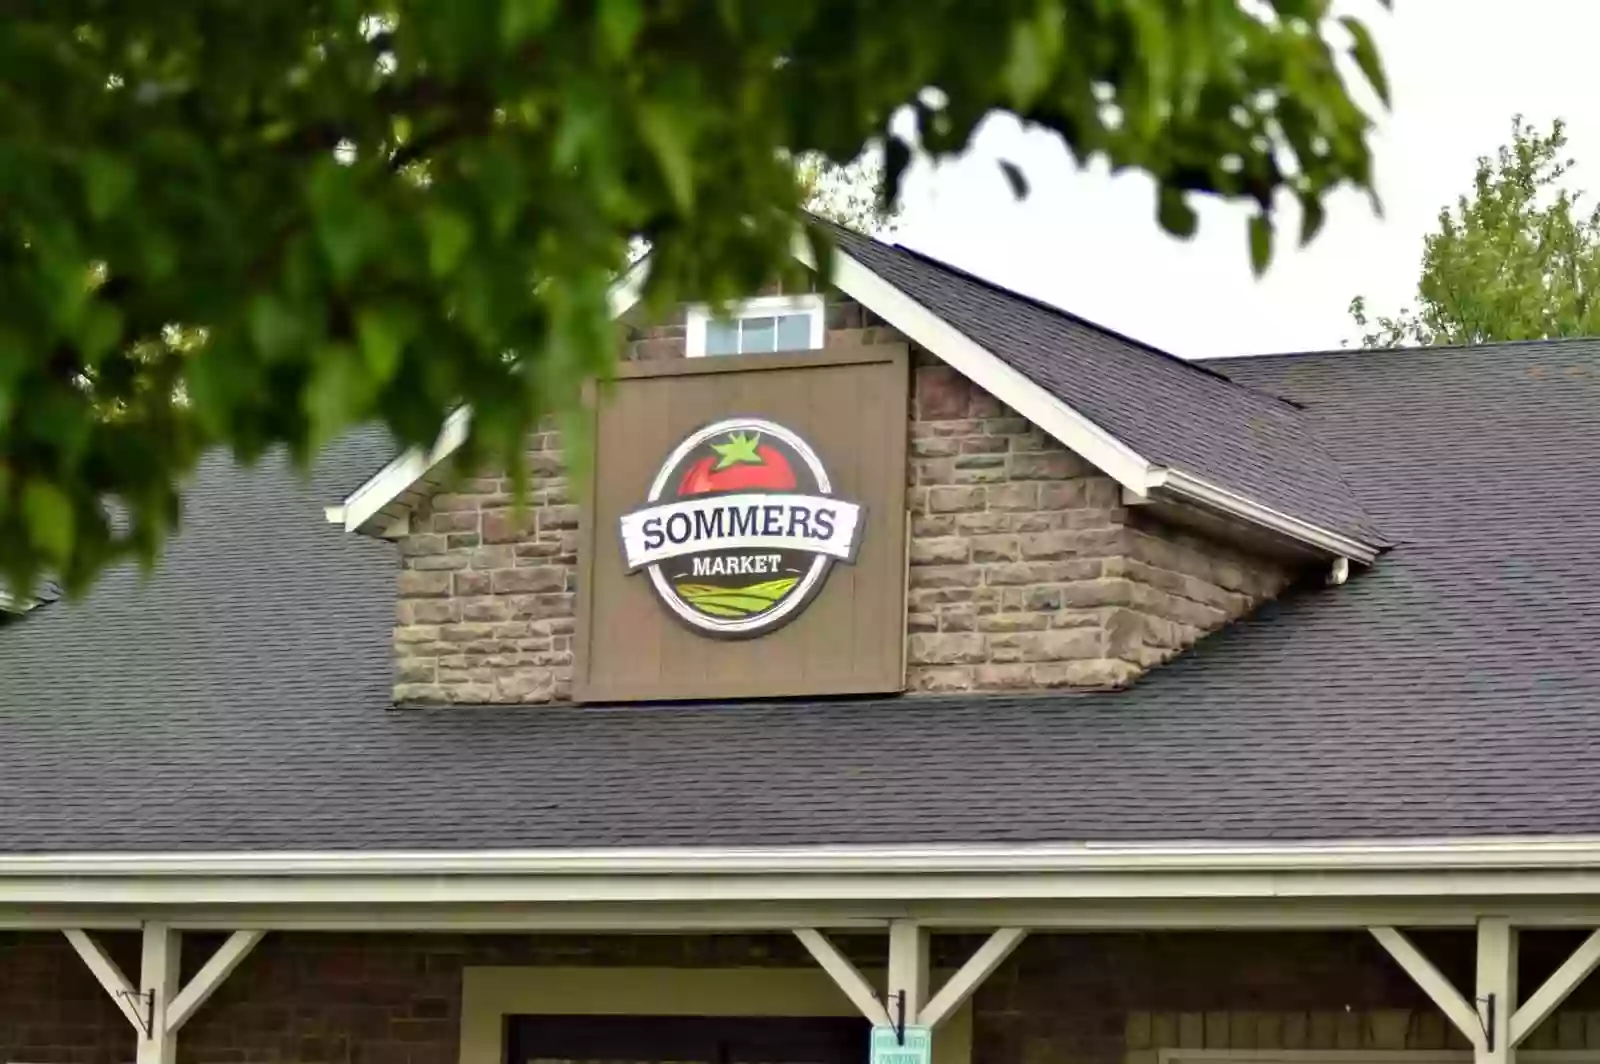 Sommers Discount Market